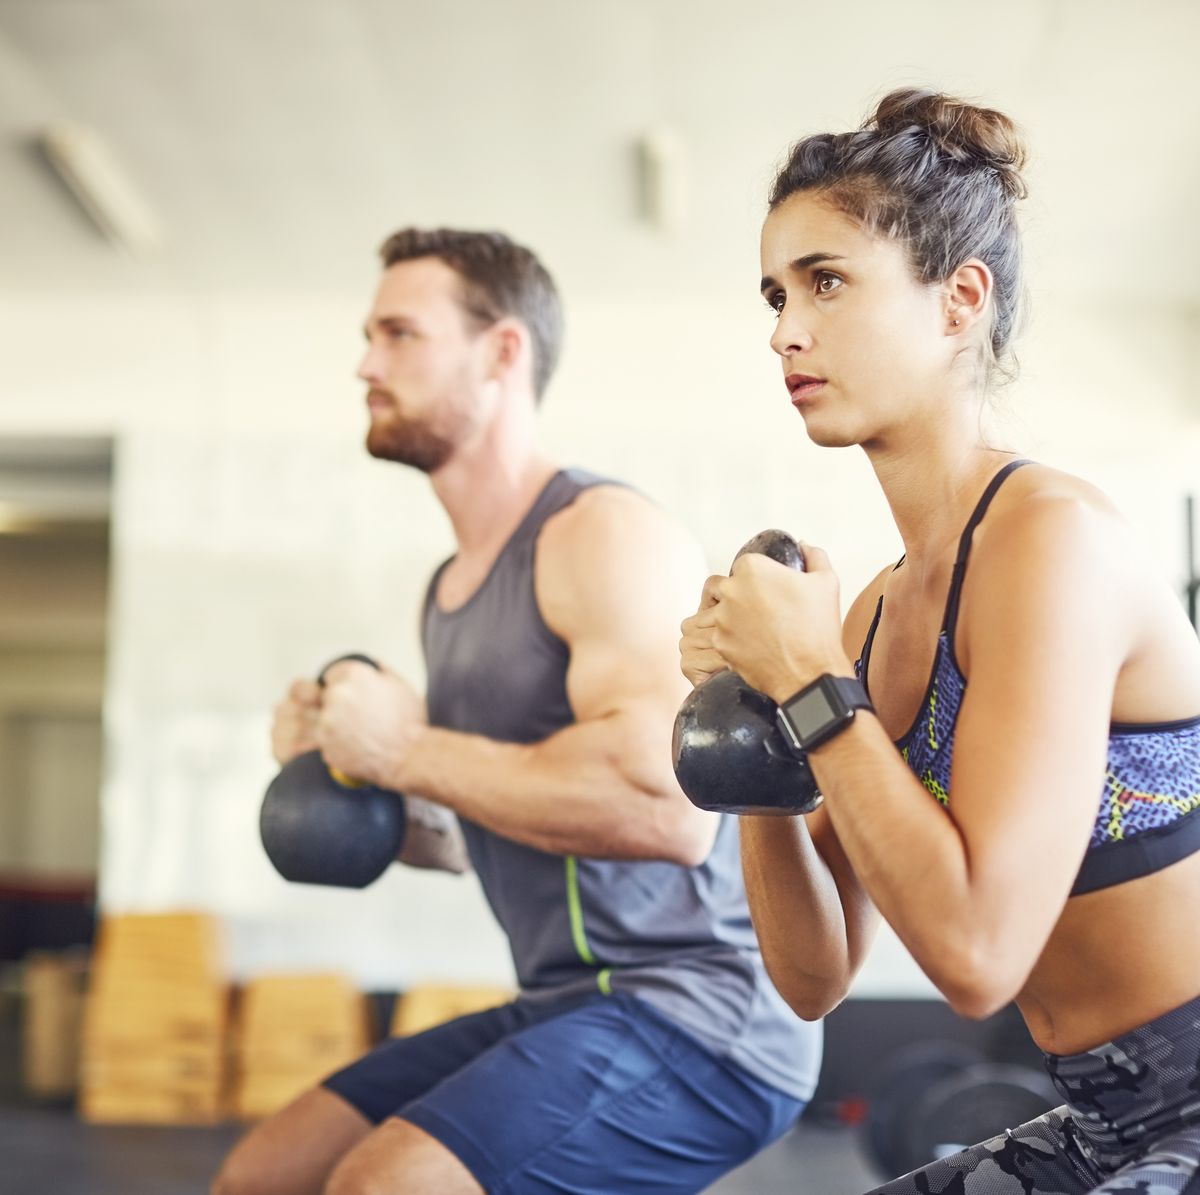 How Women Use Energy Differently From Men During Exercise…and Need